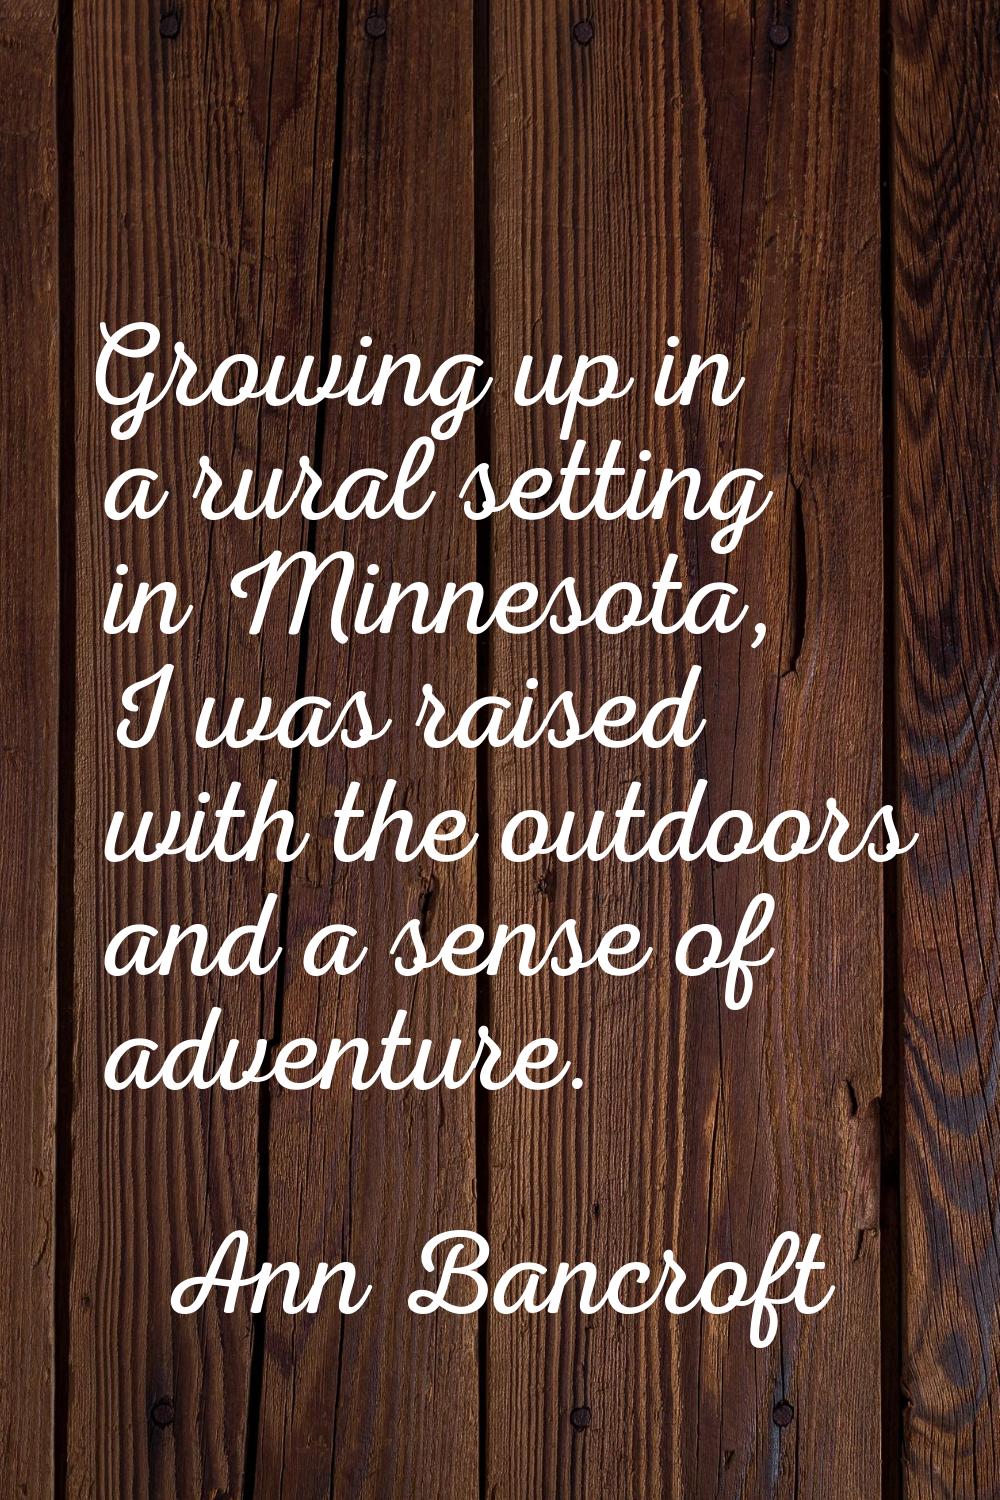 Growing up in a rural setting in Minnesota, I was raised with the outdoors and a sense of adventure